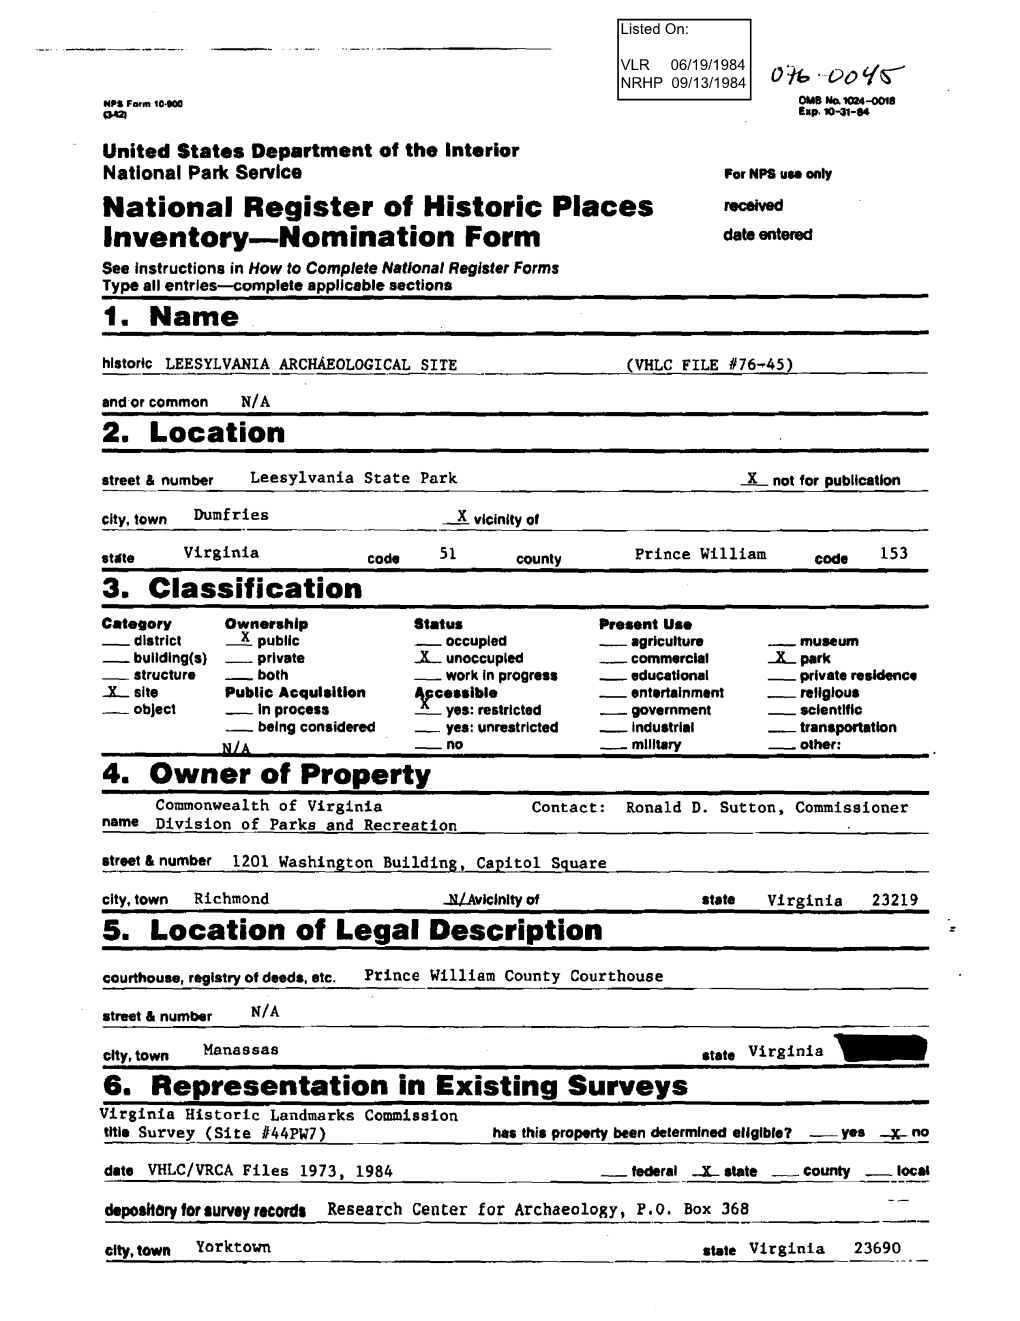 National Register of Historic Places Inventory-Nomination Form 1. Name . 2. Location 3. Classification 4. Owner of Pro~Ertv